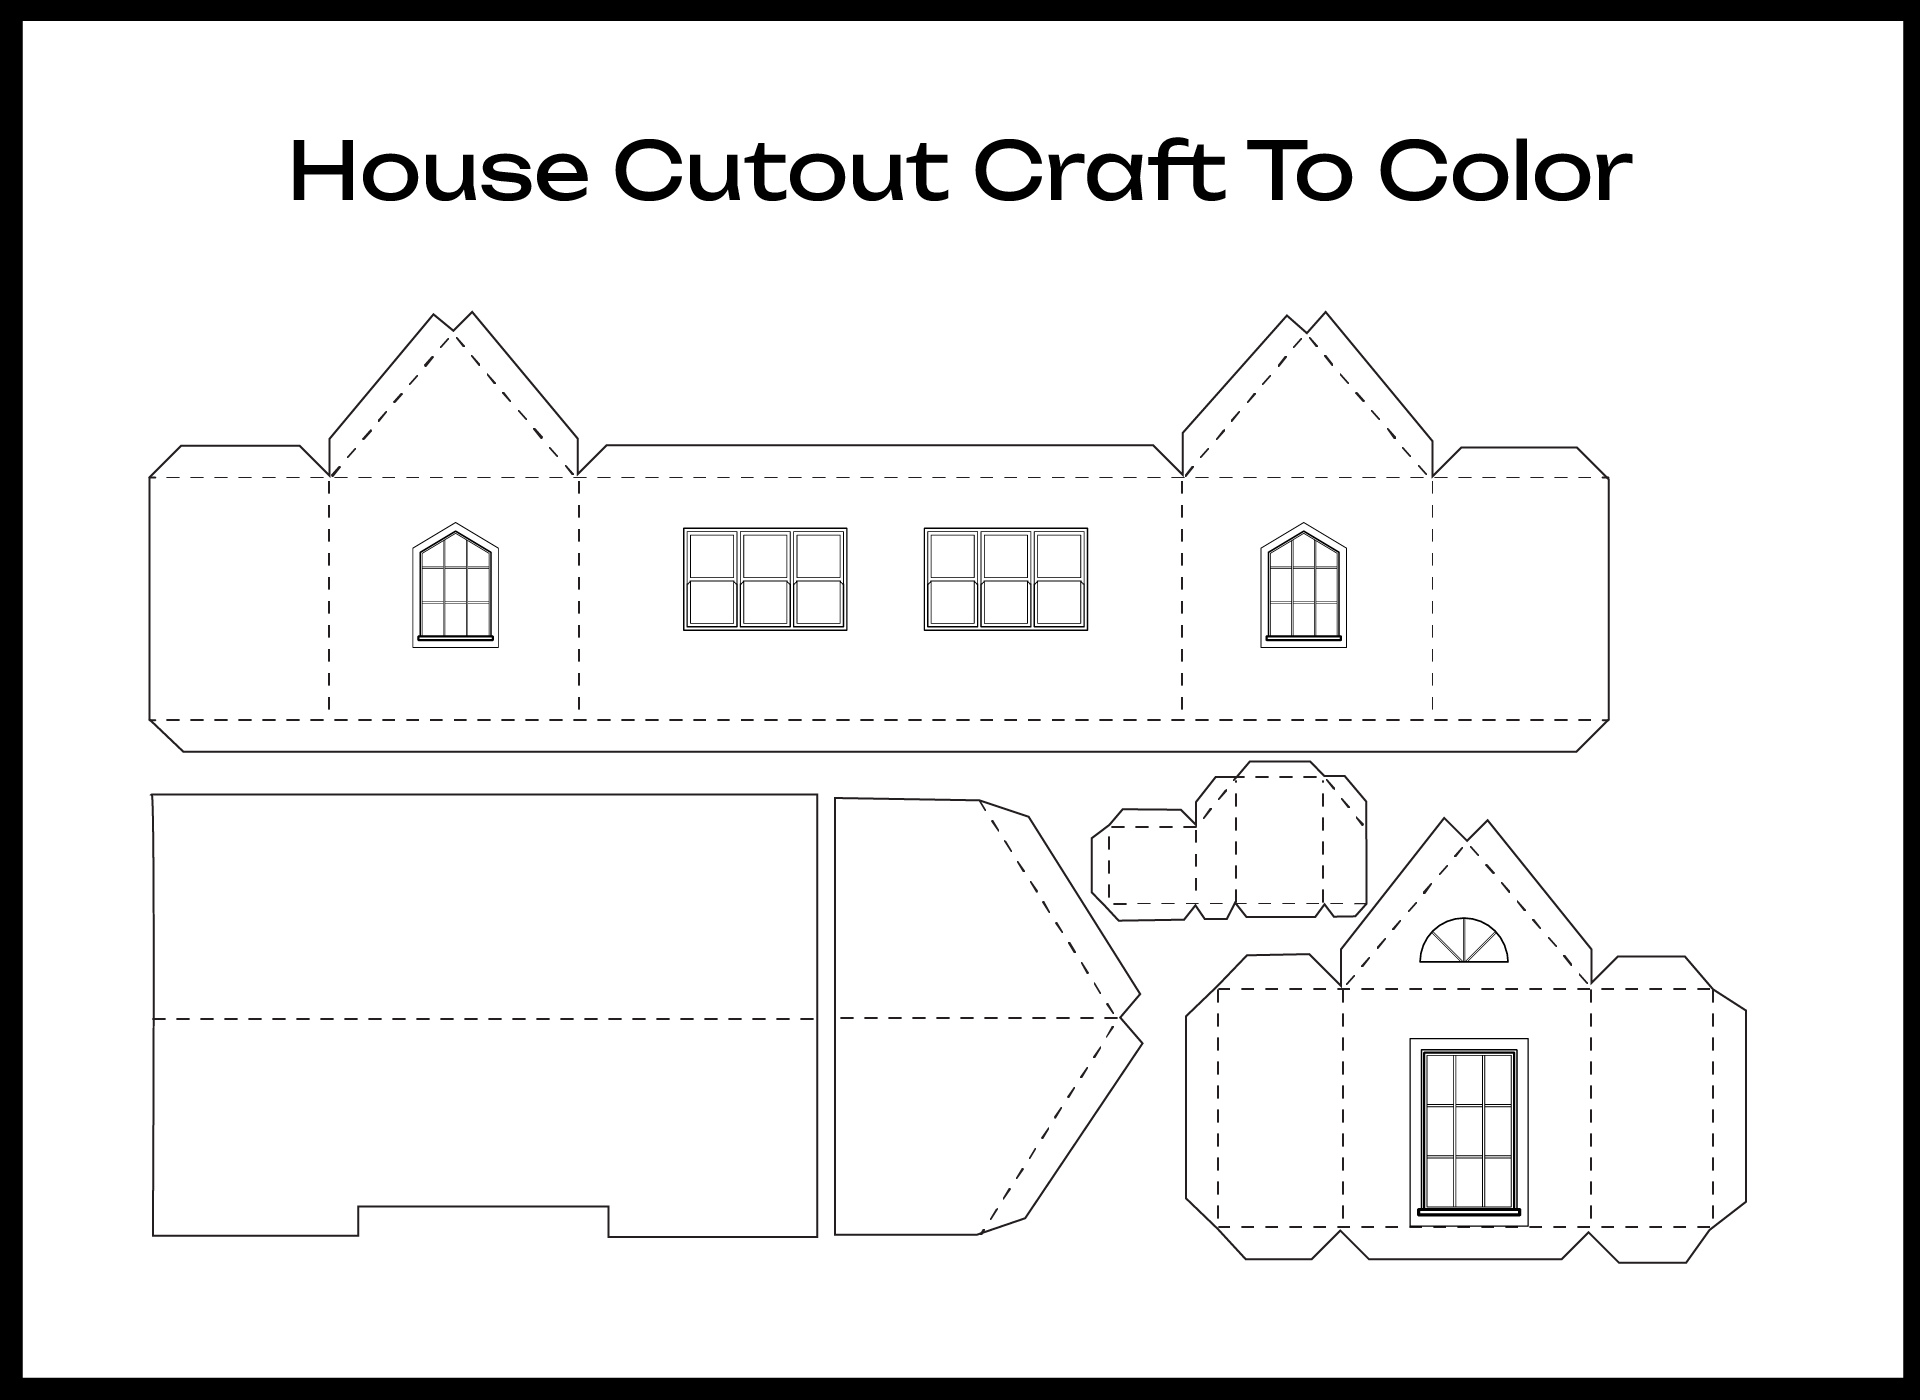 Printable House Cutout Craft To Color